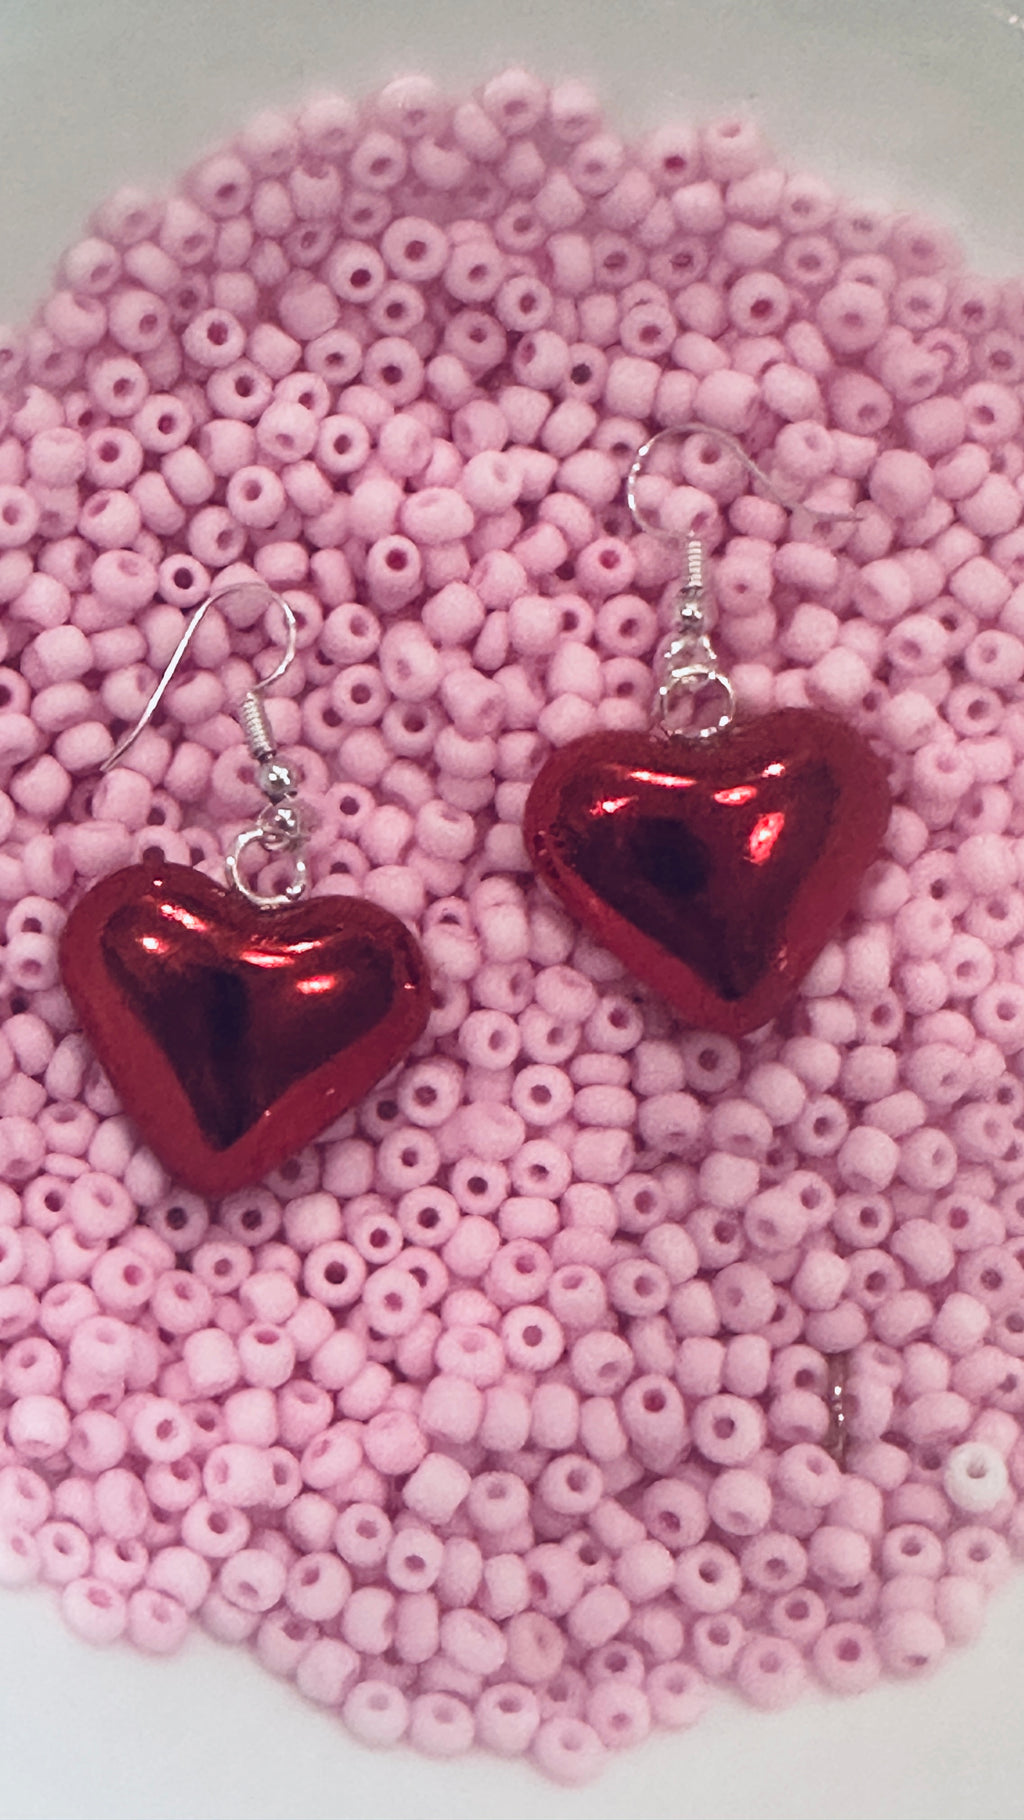 Shiny Red Heart Earrings on Hypoallergenic Silver Wires